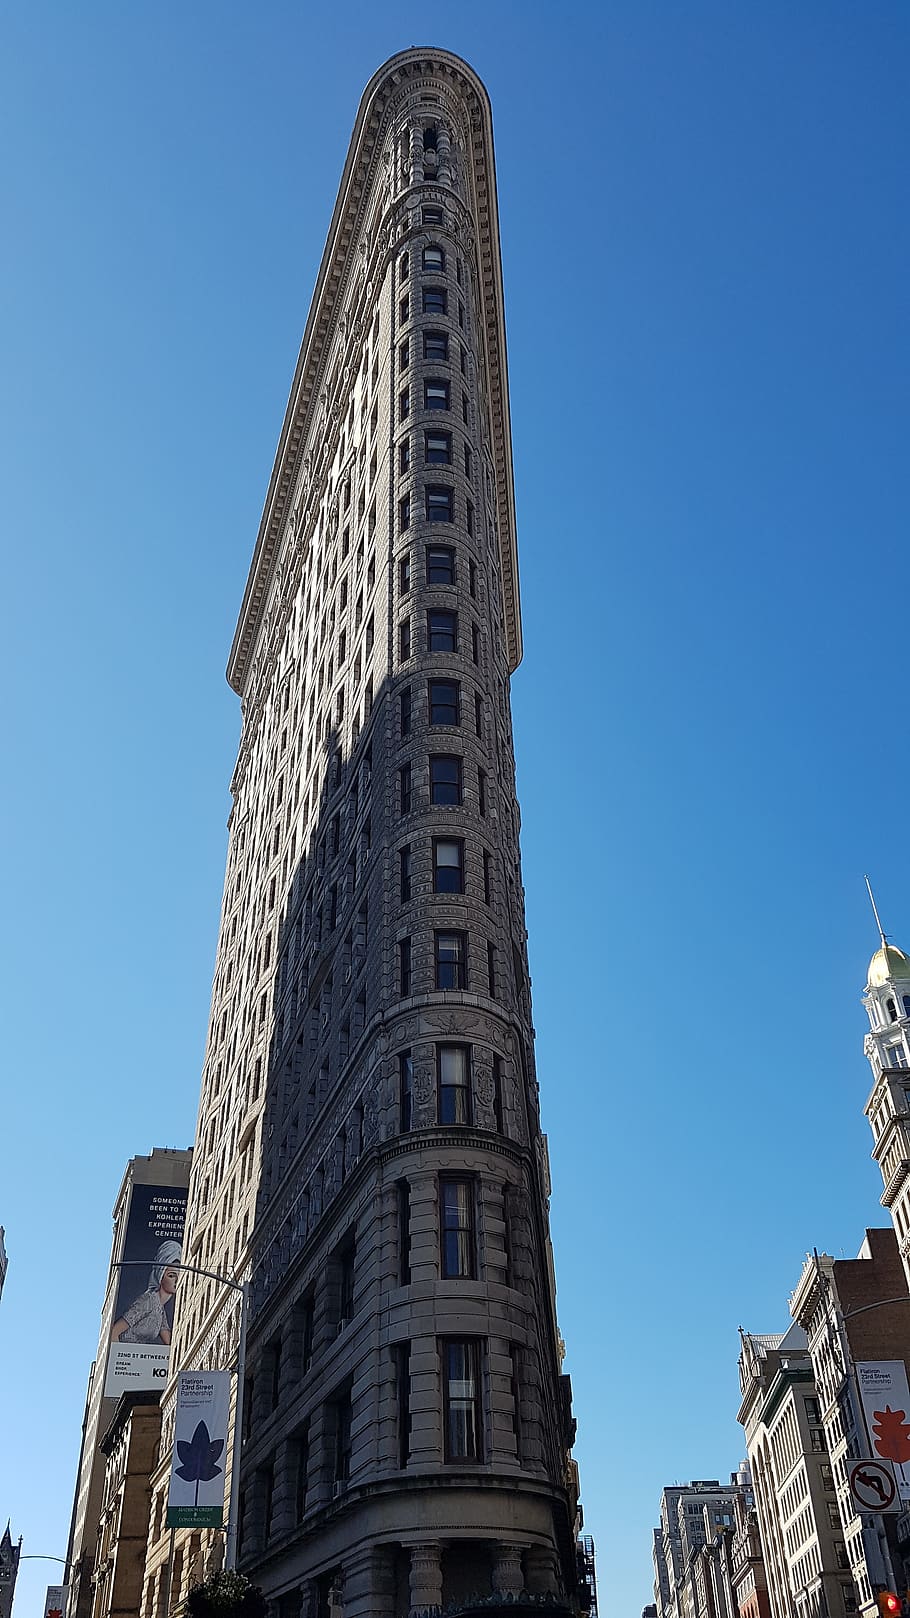 flatiron building, new york, sky, usa, places of interest, nyc, skyscraper, attraction, sightseeing, interesting